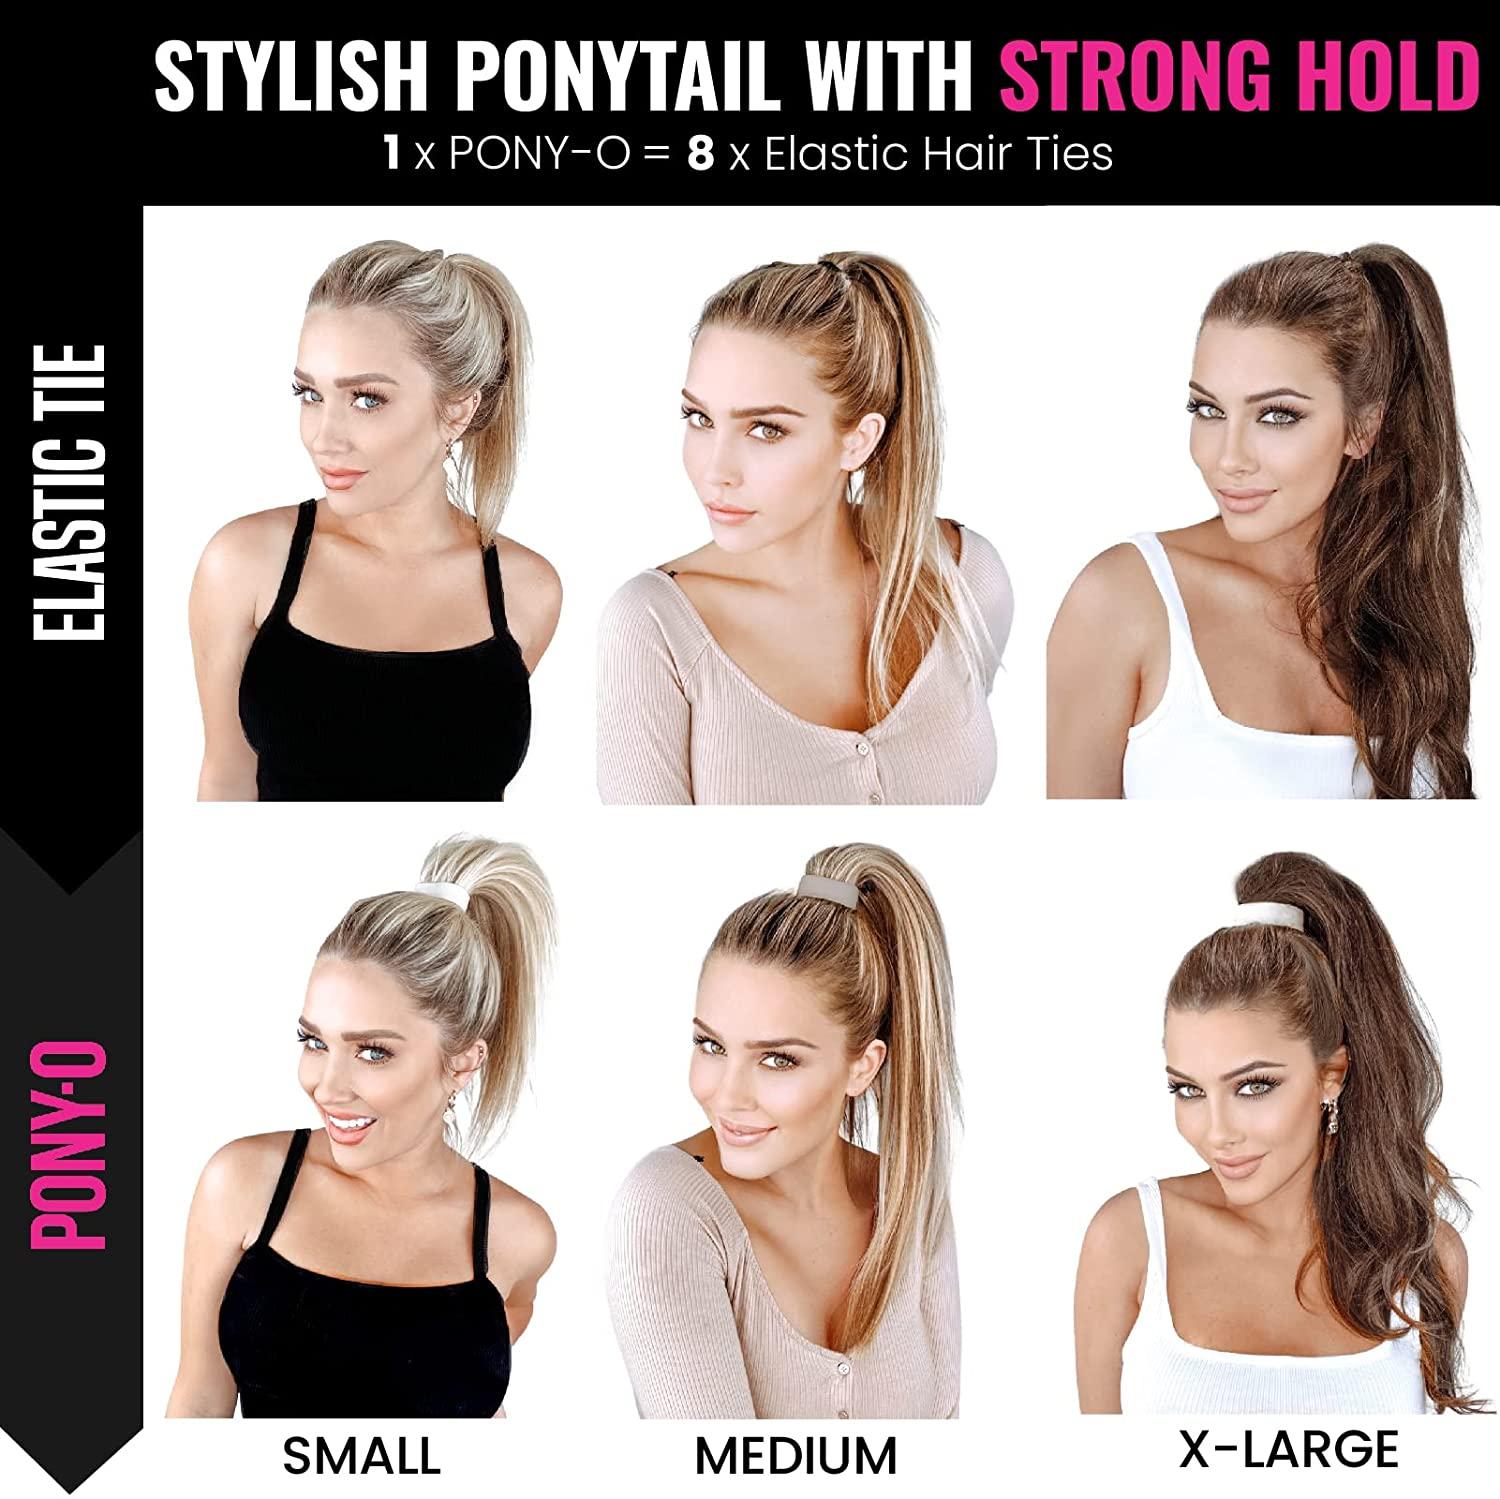 PONY-O Ponytail Holders: Bendable hair ties that work 